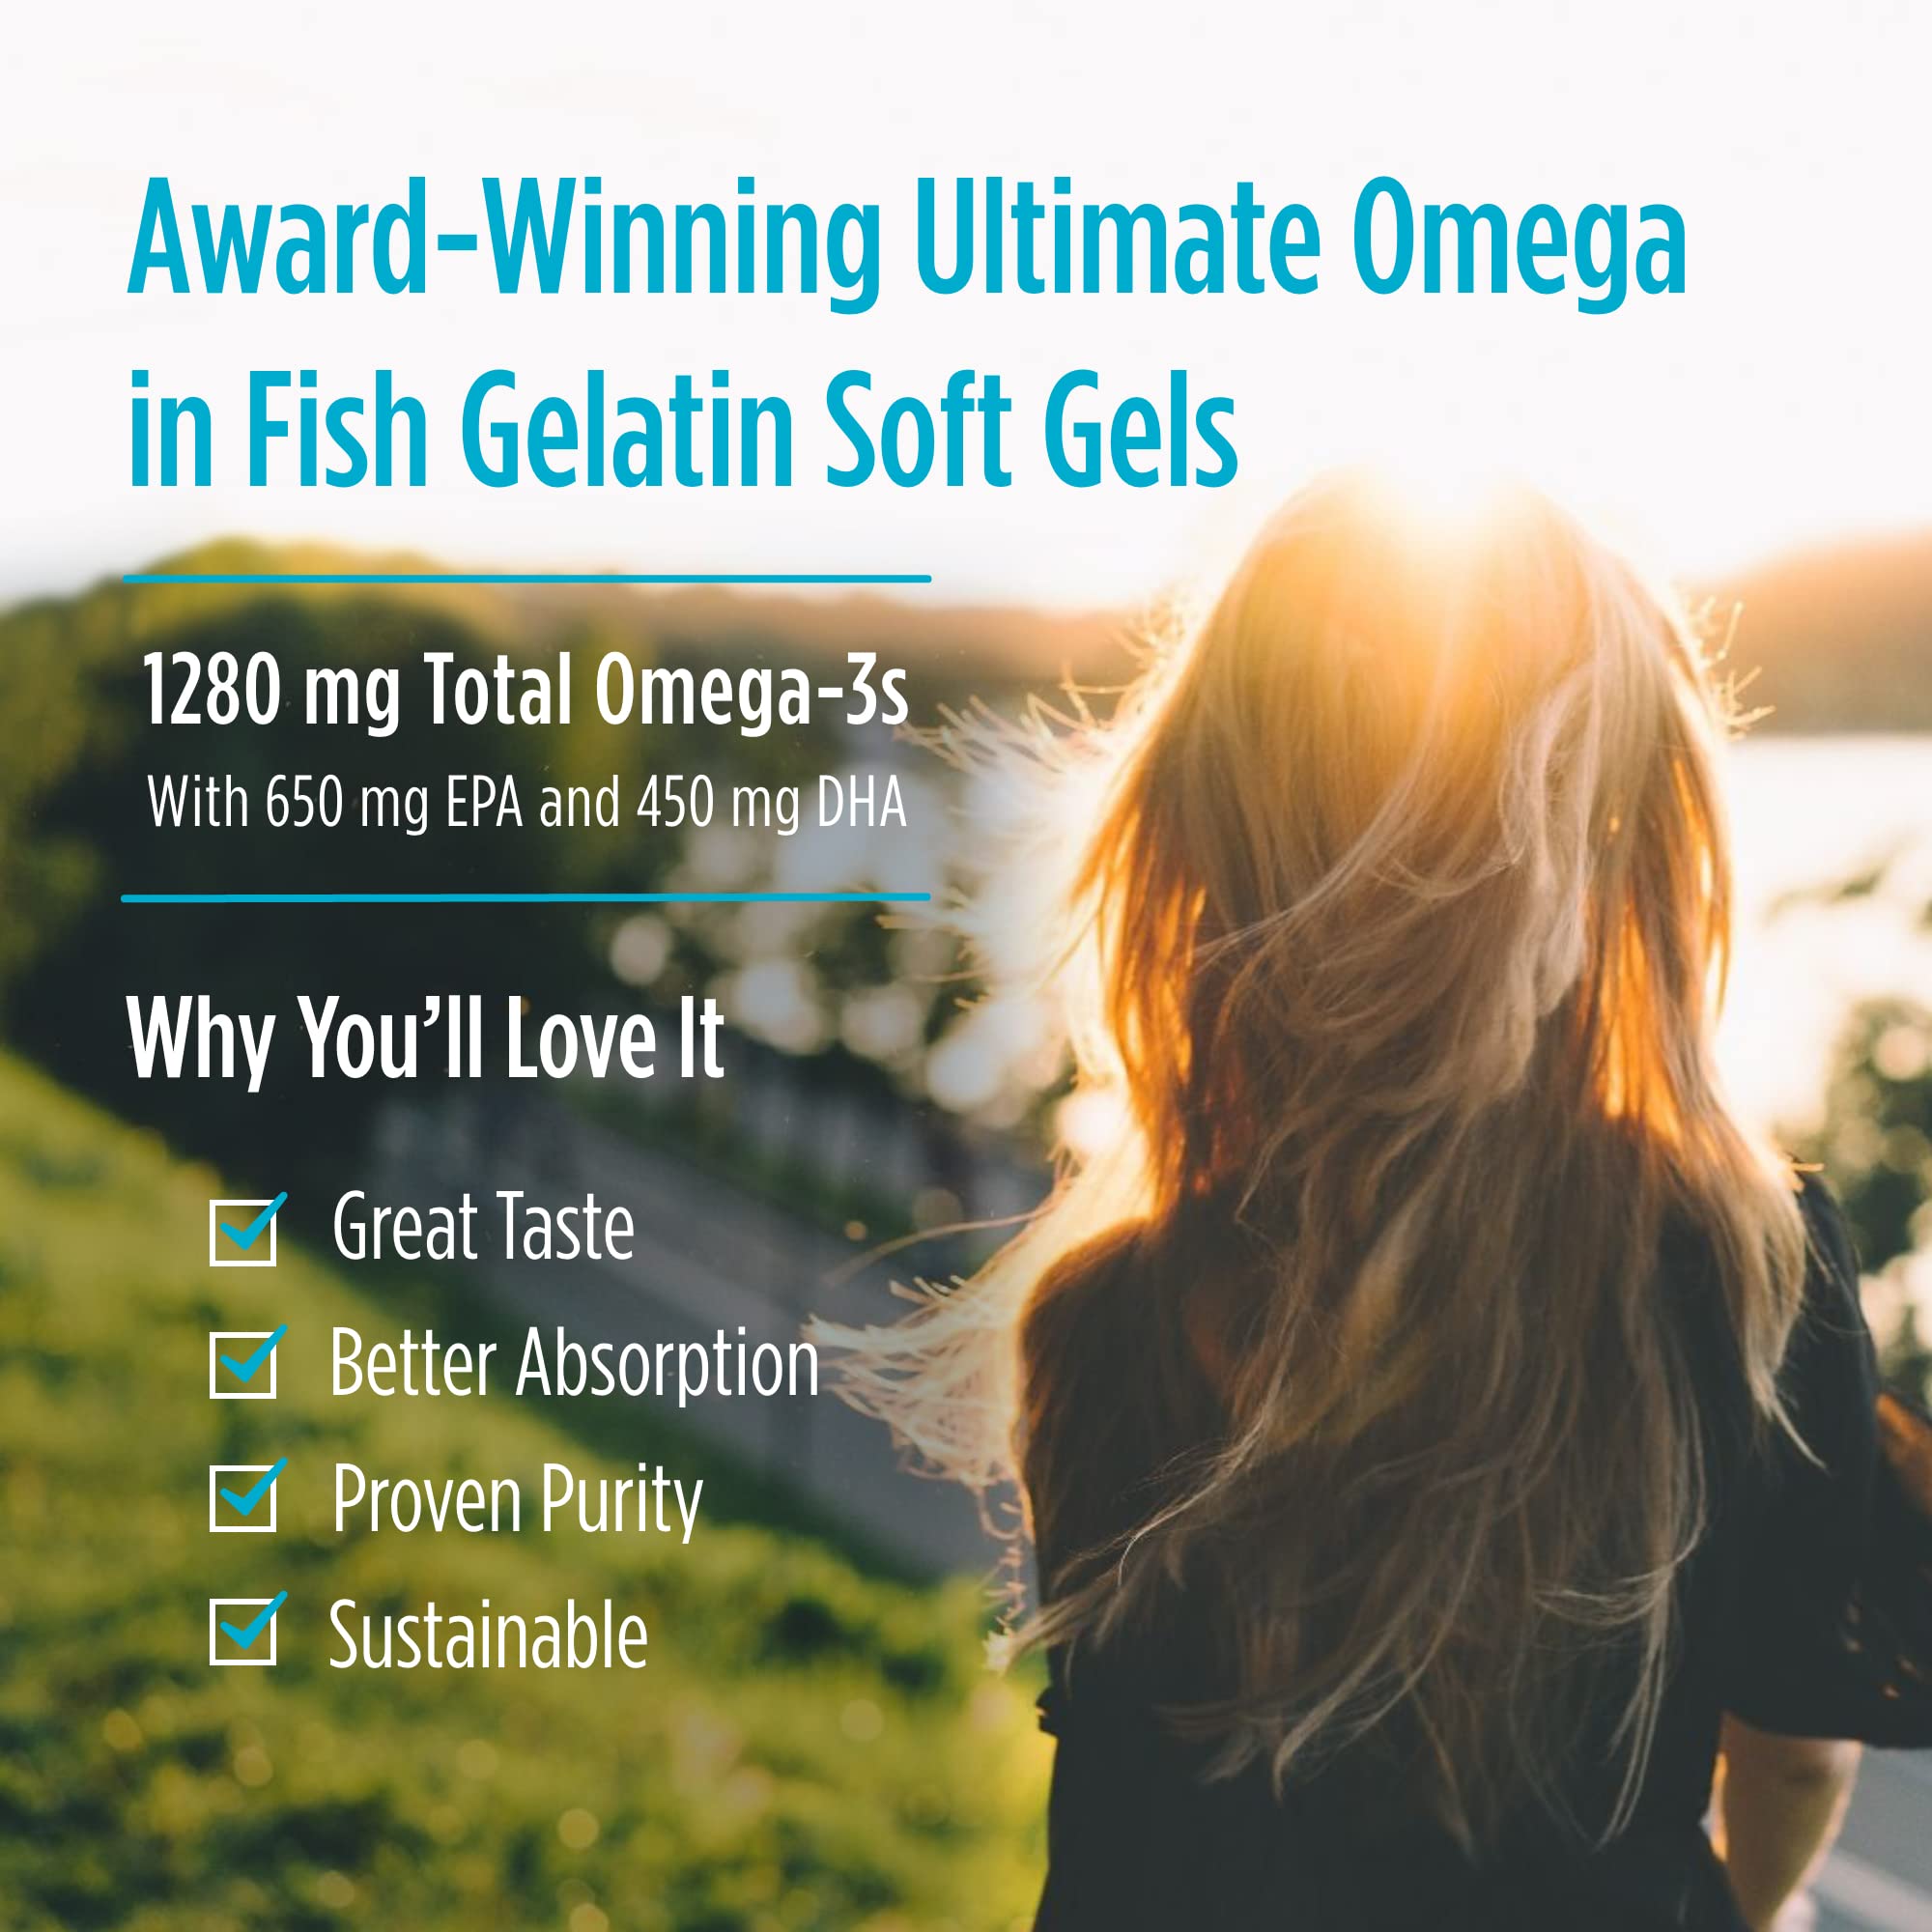 Nordic Naturals Ultimate Omega in Fish Gelatin, Lemon Flavor - 1280 mg Omega-3-60 Soft Gels - High-Potency Fish Oil Supplement - EPA & DHA - Promotes Brain & Heart Health - Non-GMO - 30 Servings